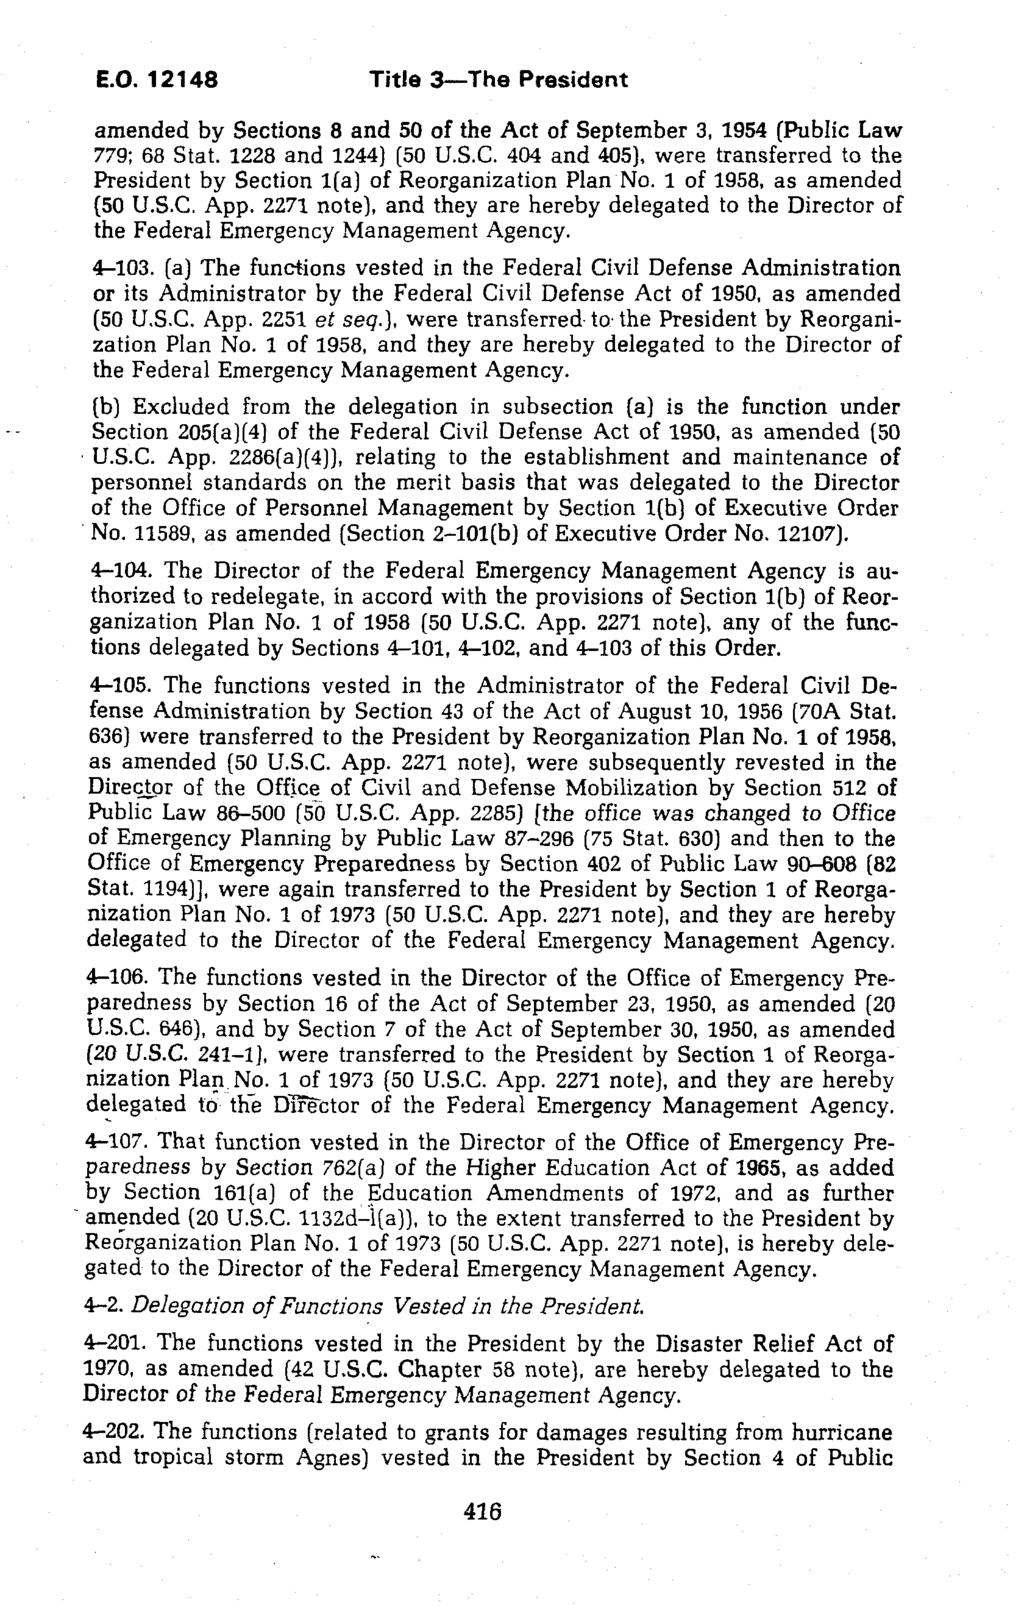 E.O. 121 48 Title 3-The President amended by Sections 8 and 50 of the Act of September 3, 1954 (Public Law 779; 68 Stat. 1228 and 1244) (50 U.S.C.